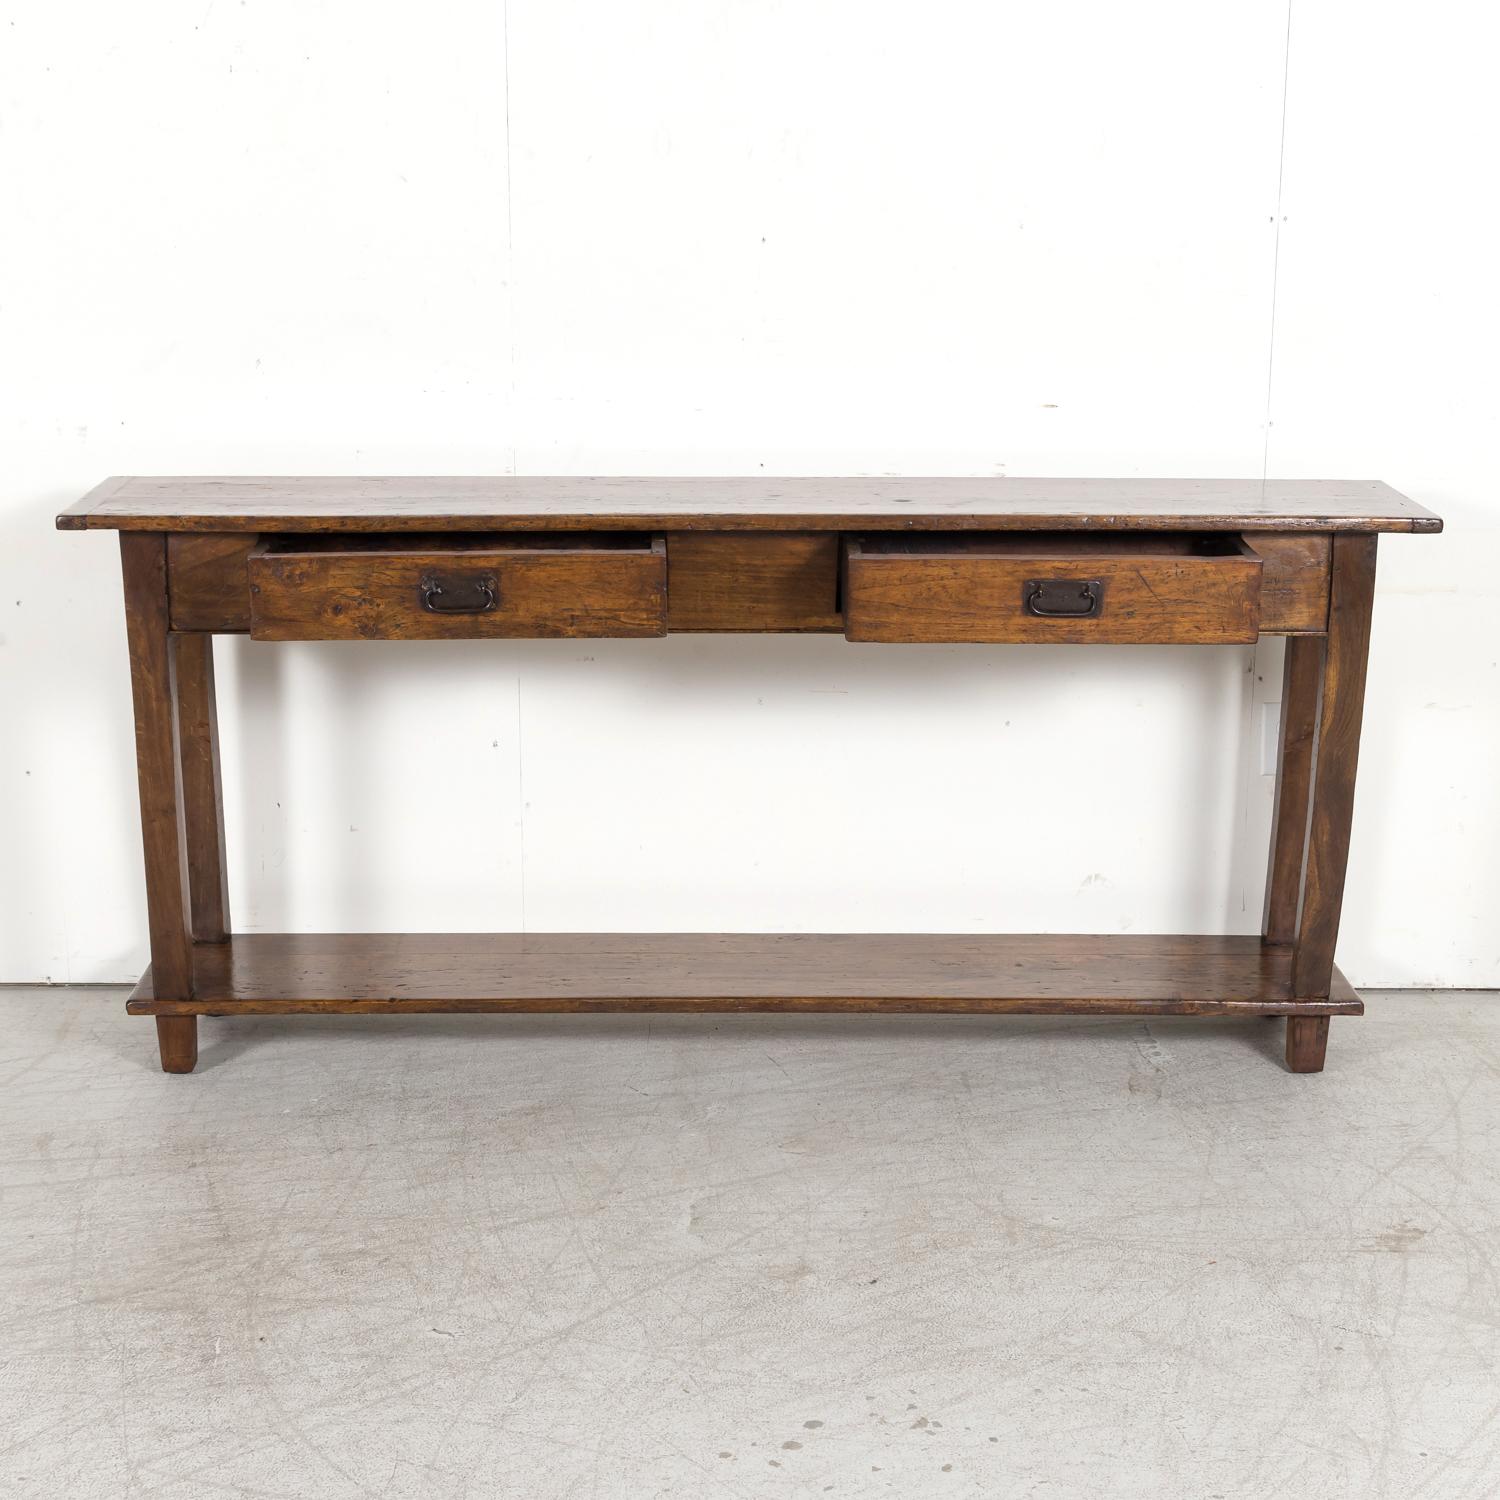 Rustic Antique Country French Walnut and Oak Console or Sofa Table with Drawers 1